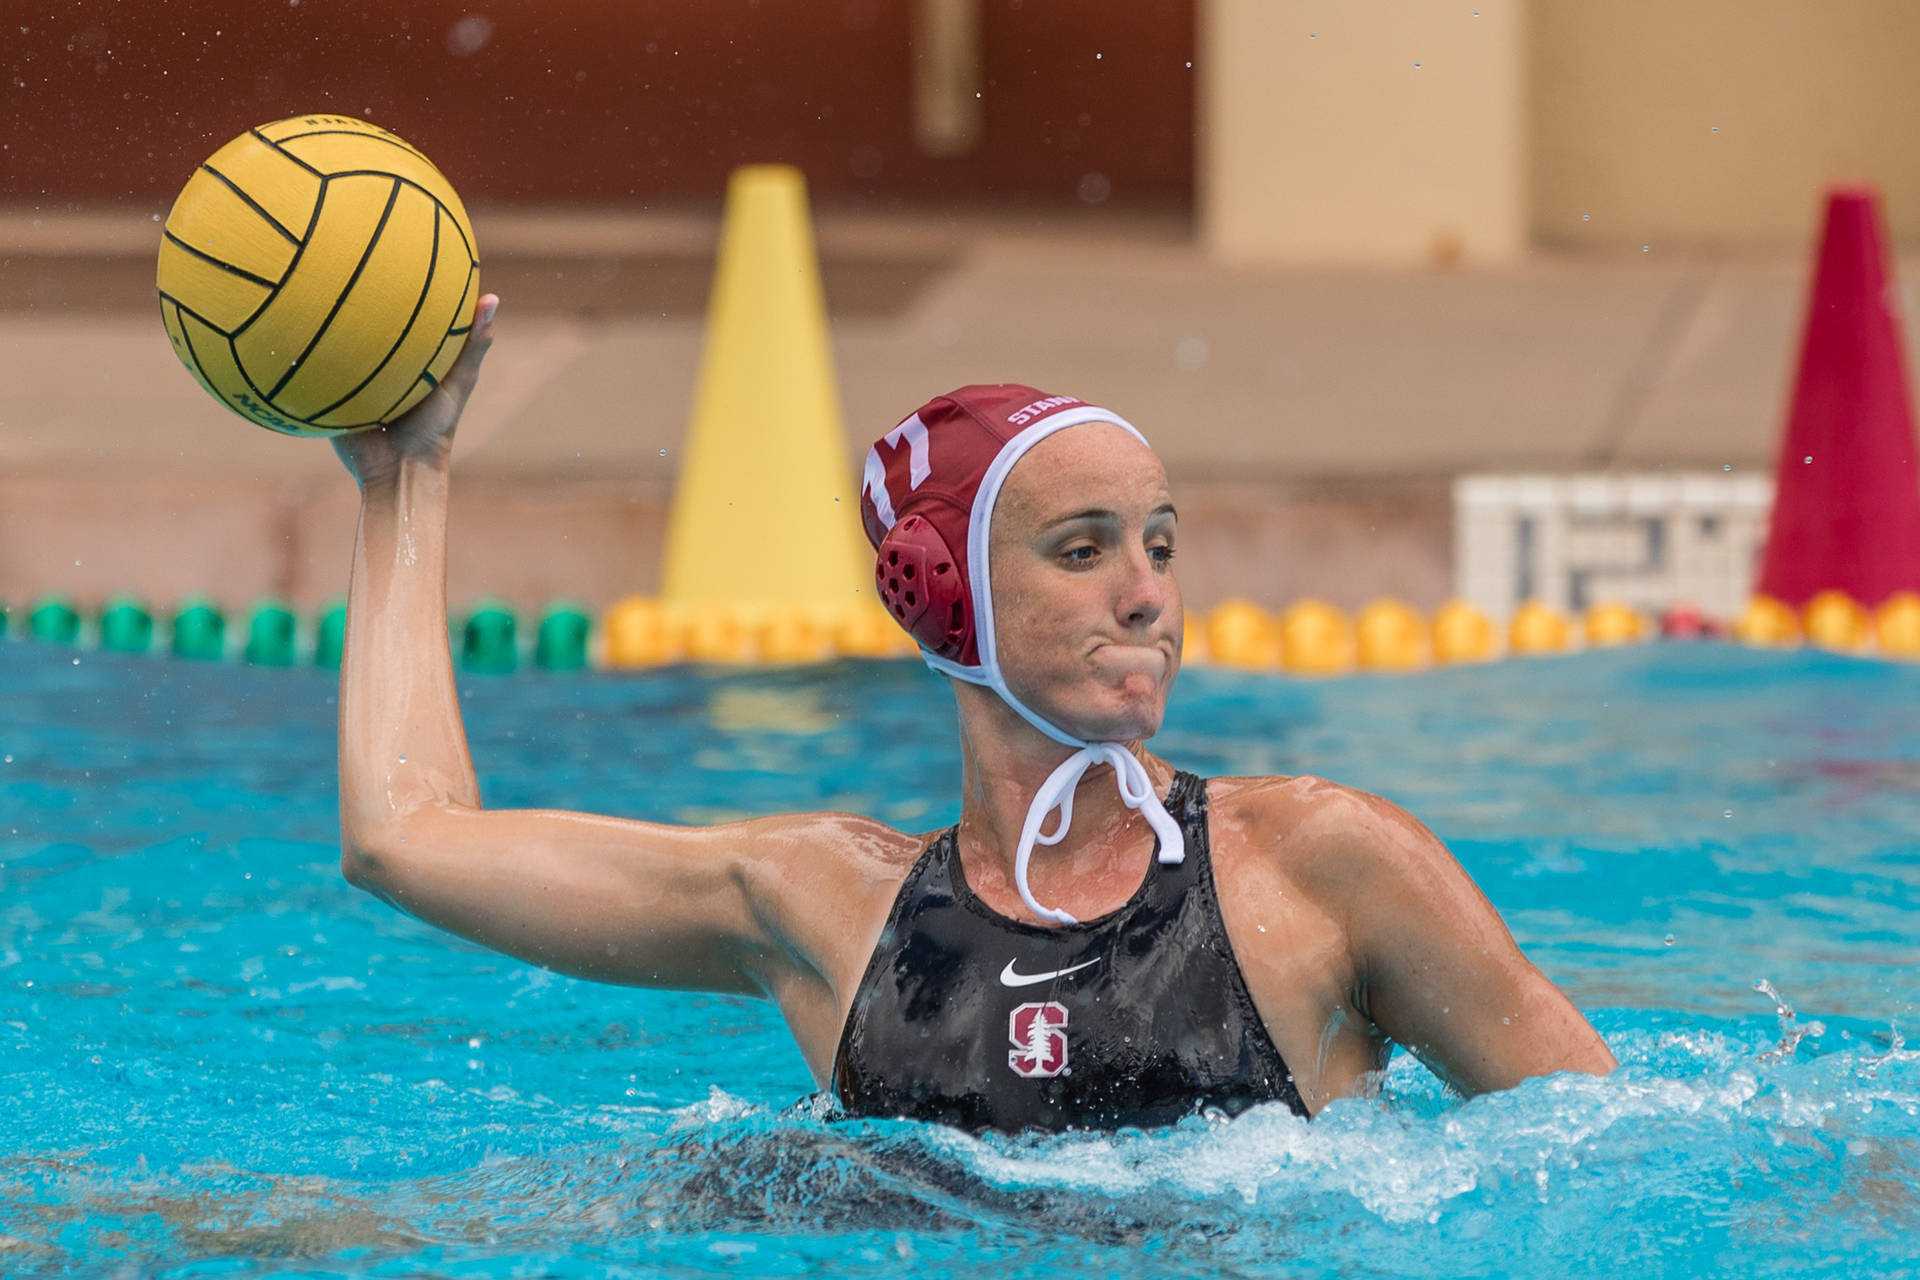 Makenzie Fischer in action during a water polo match Wallpaper